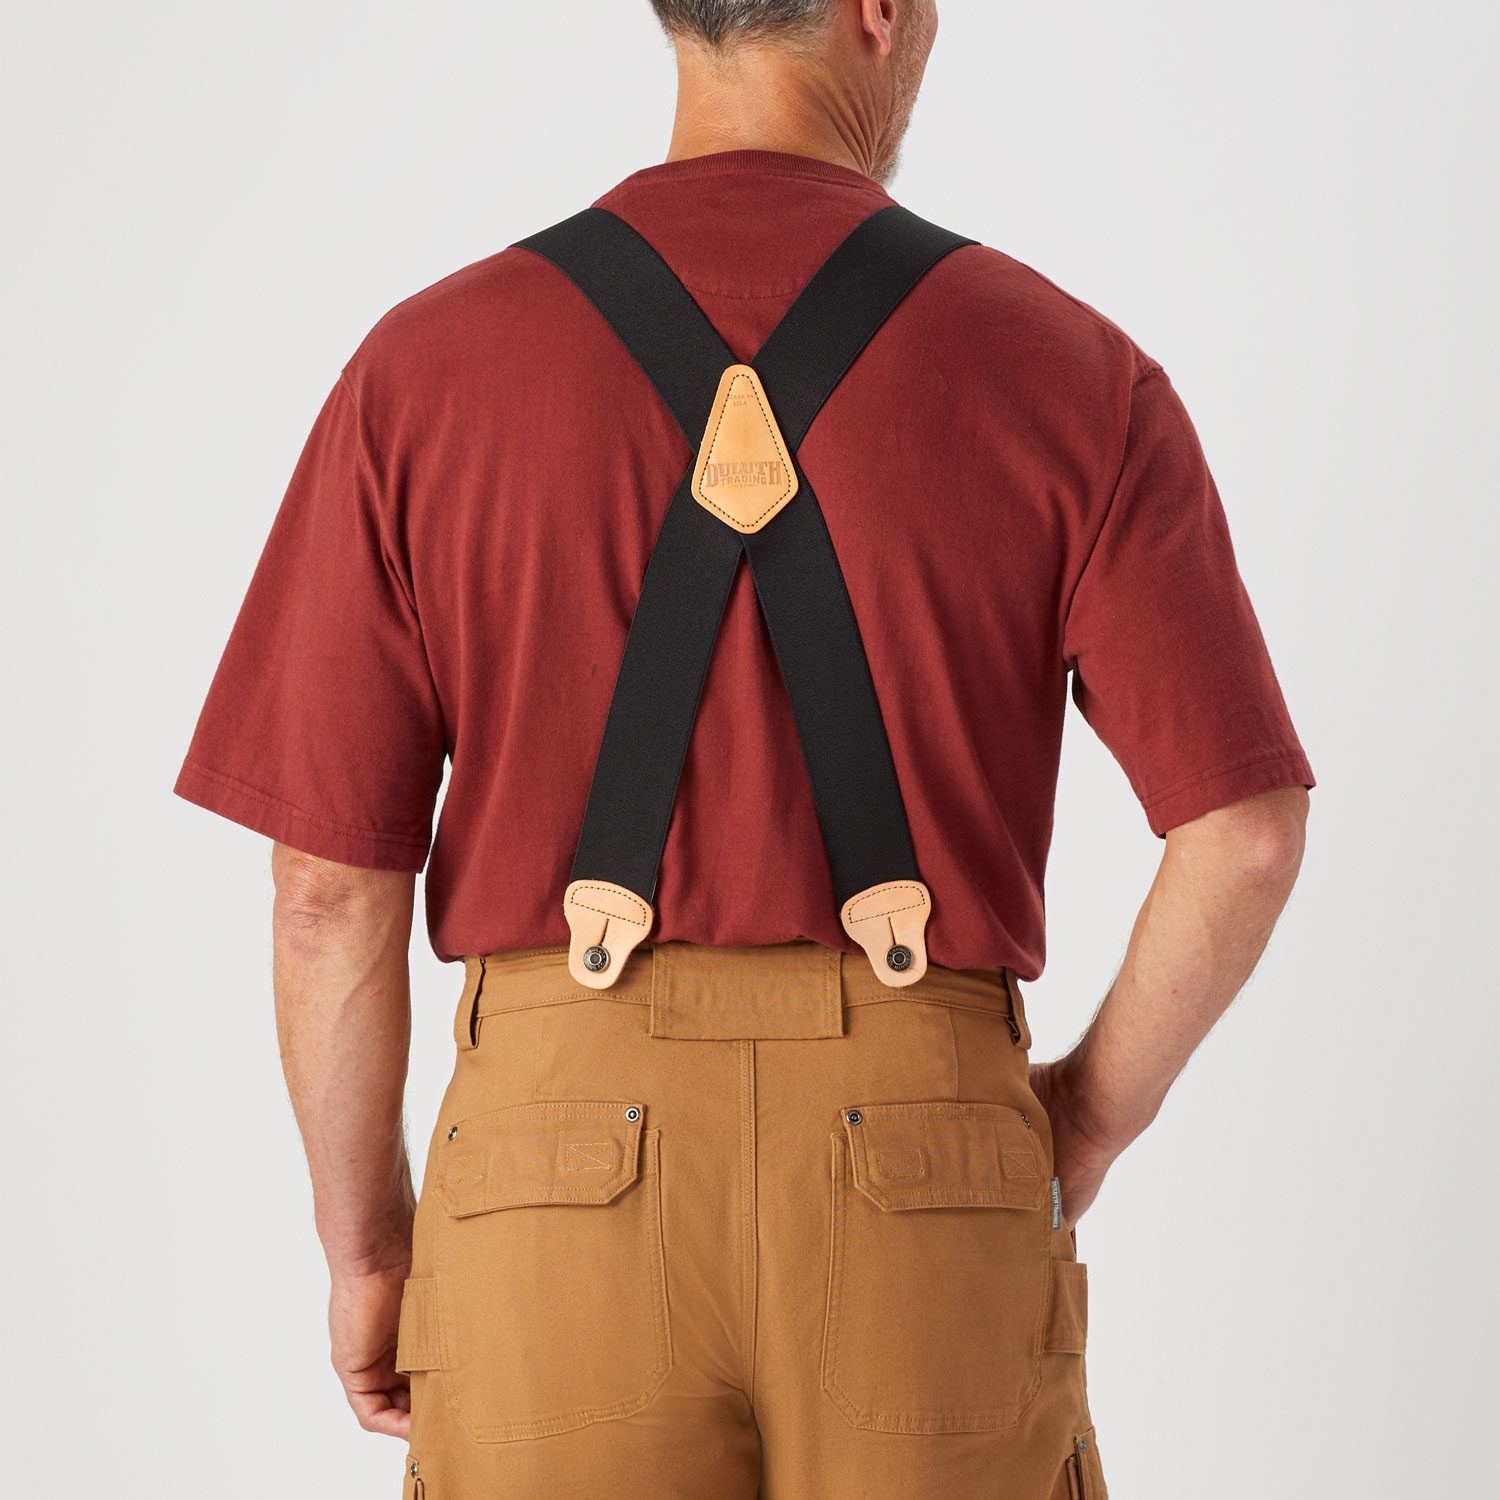 Duluth X-Back Button Suspenders